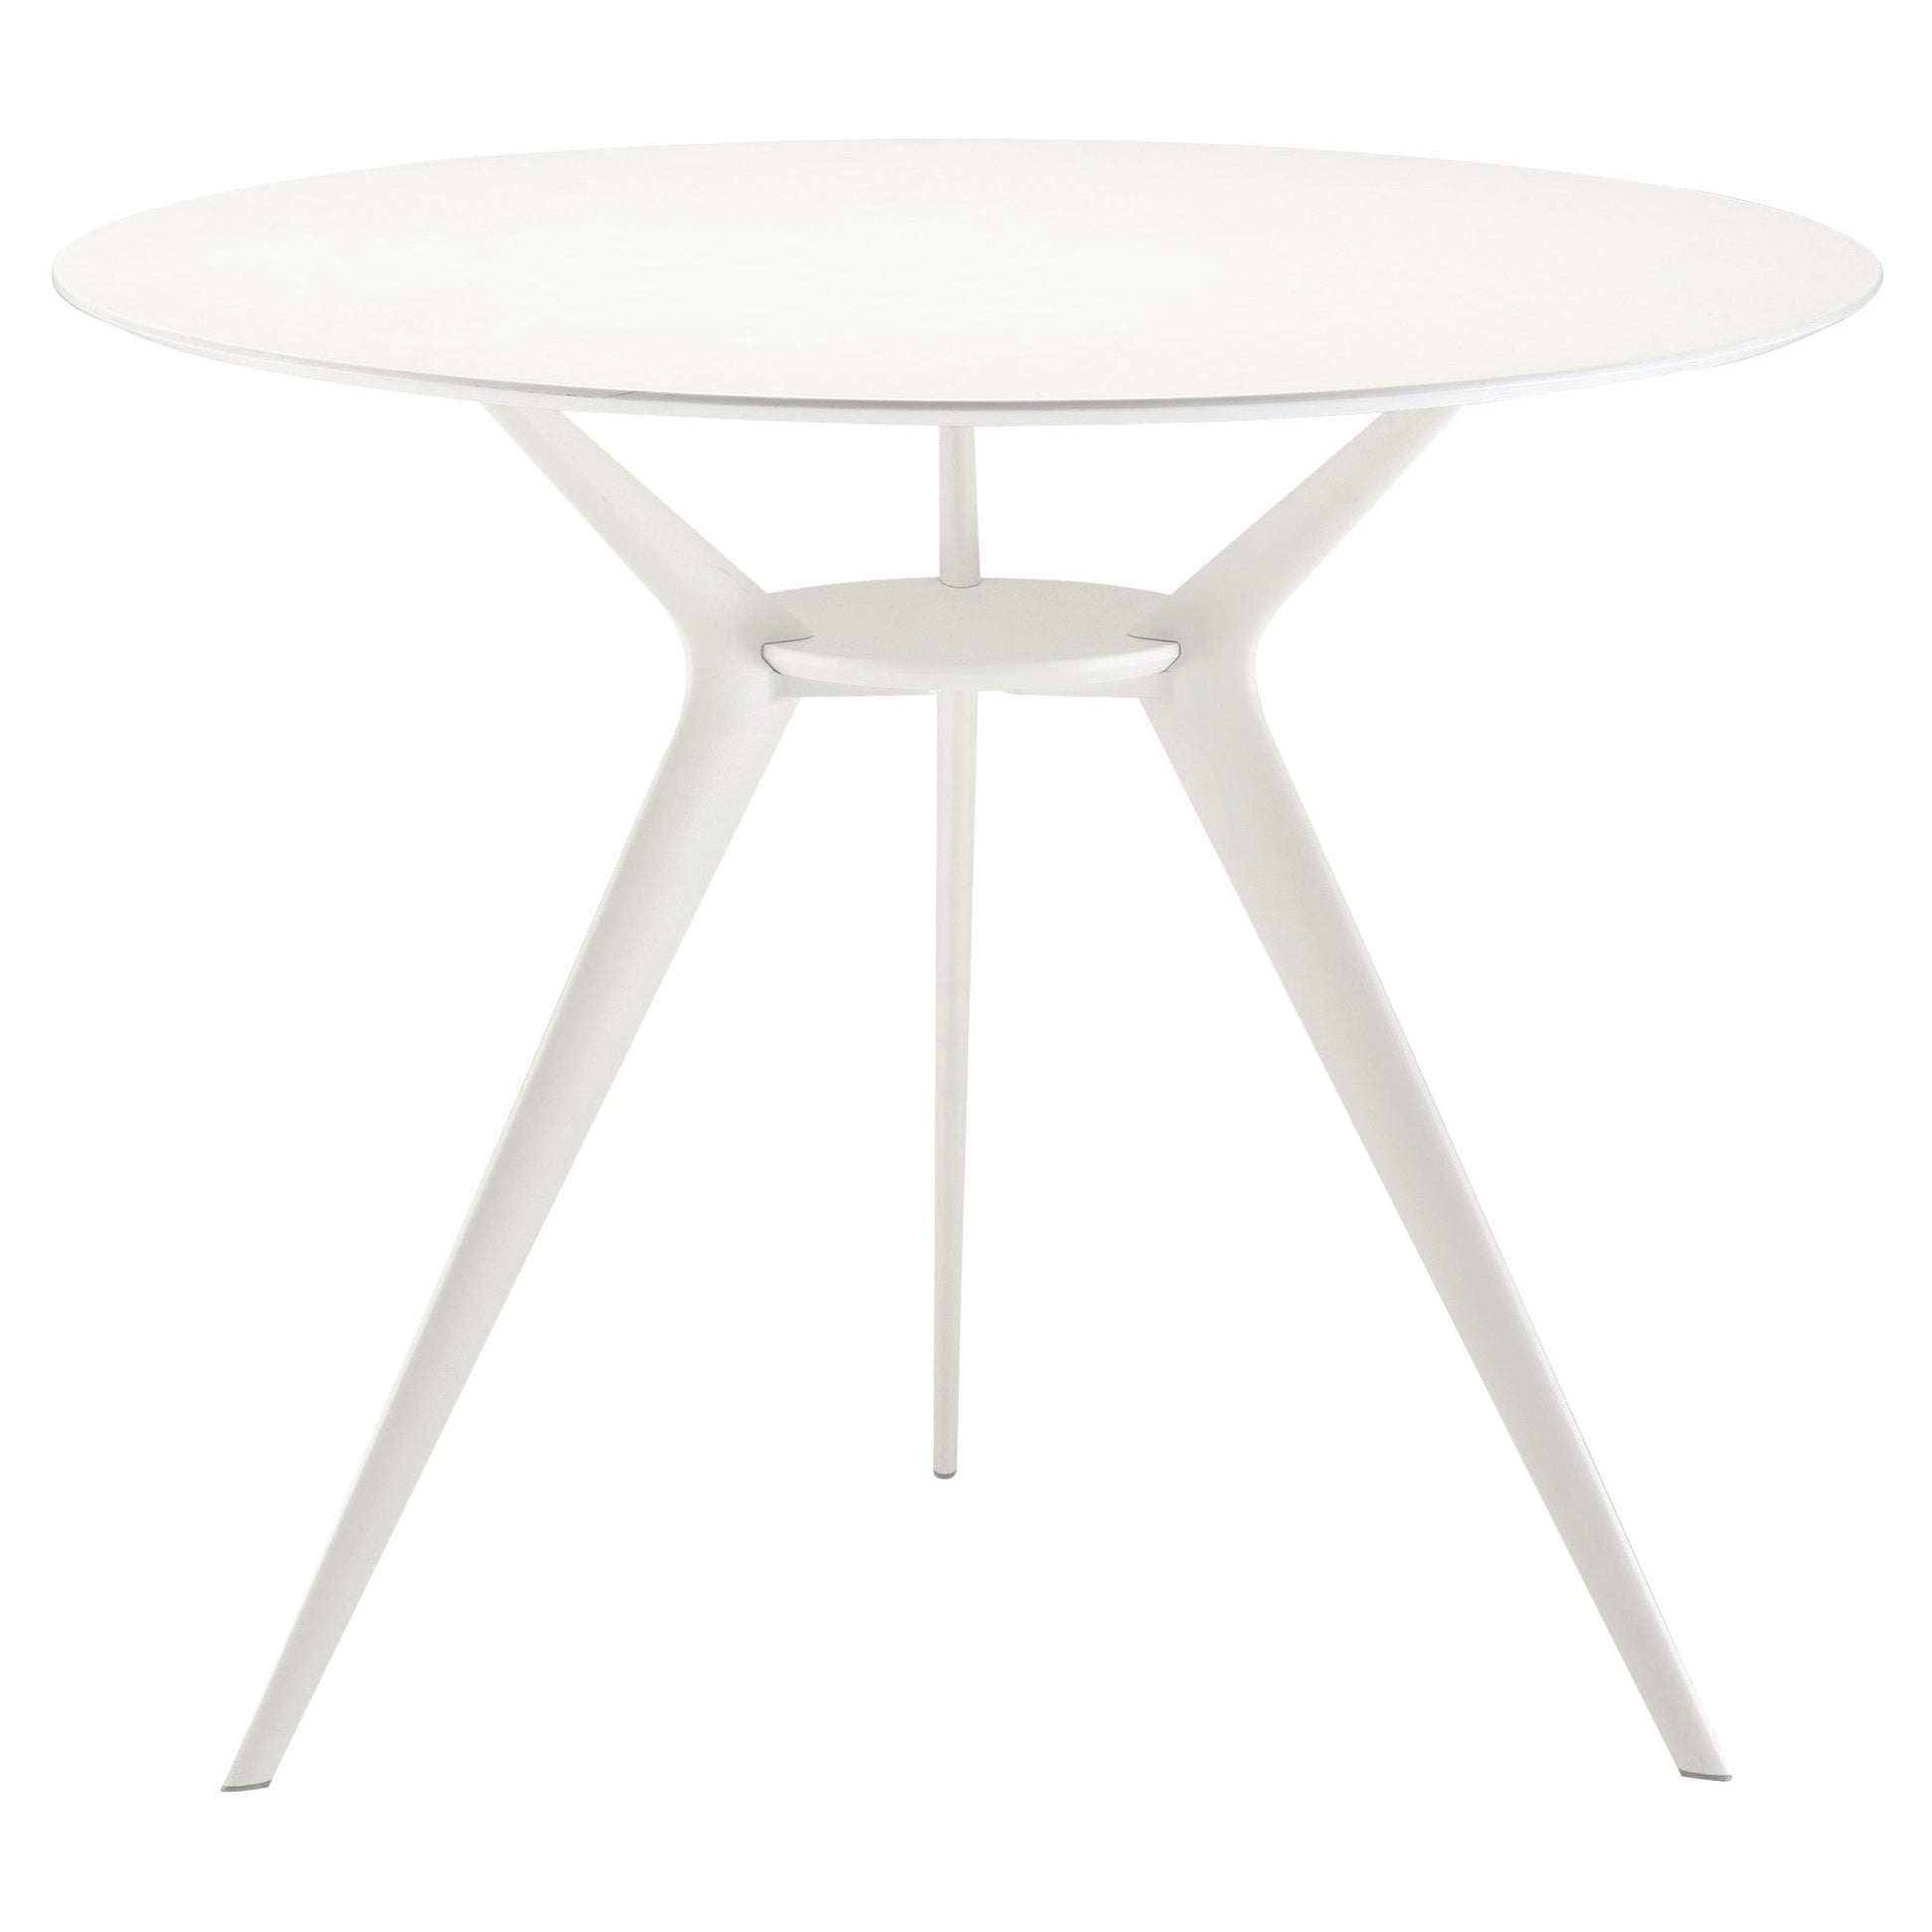 Alias Biplane 401 Table in White MDF Top with White Lacquered Aluminium Frame